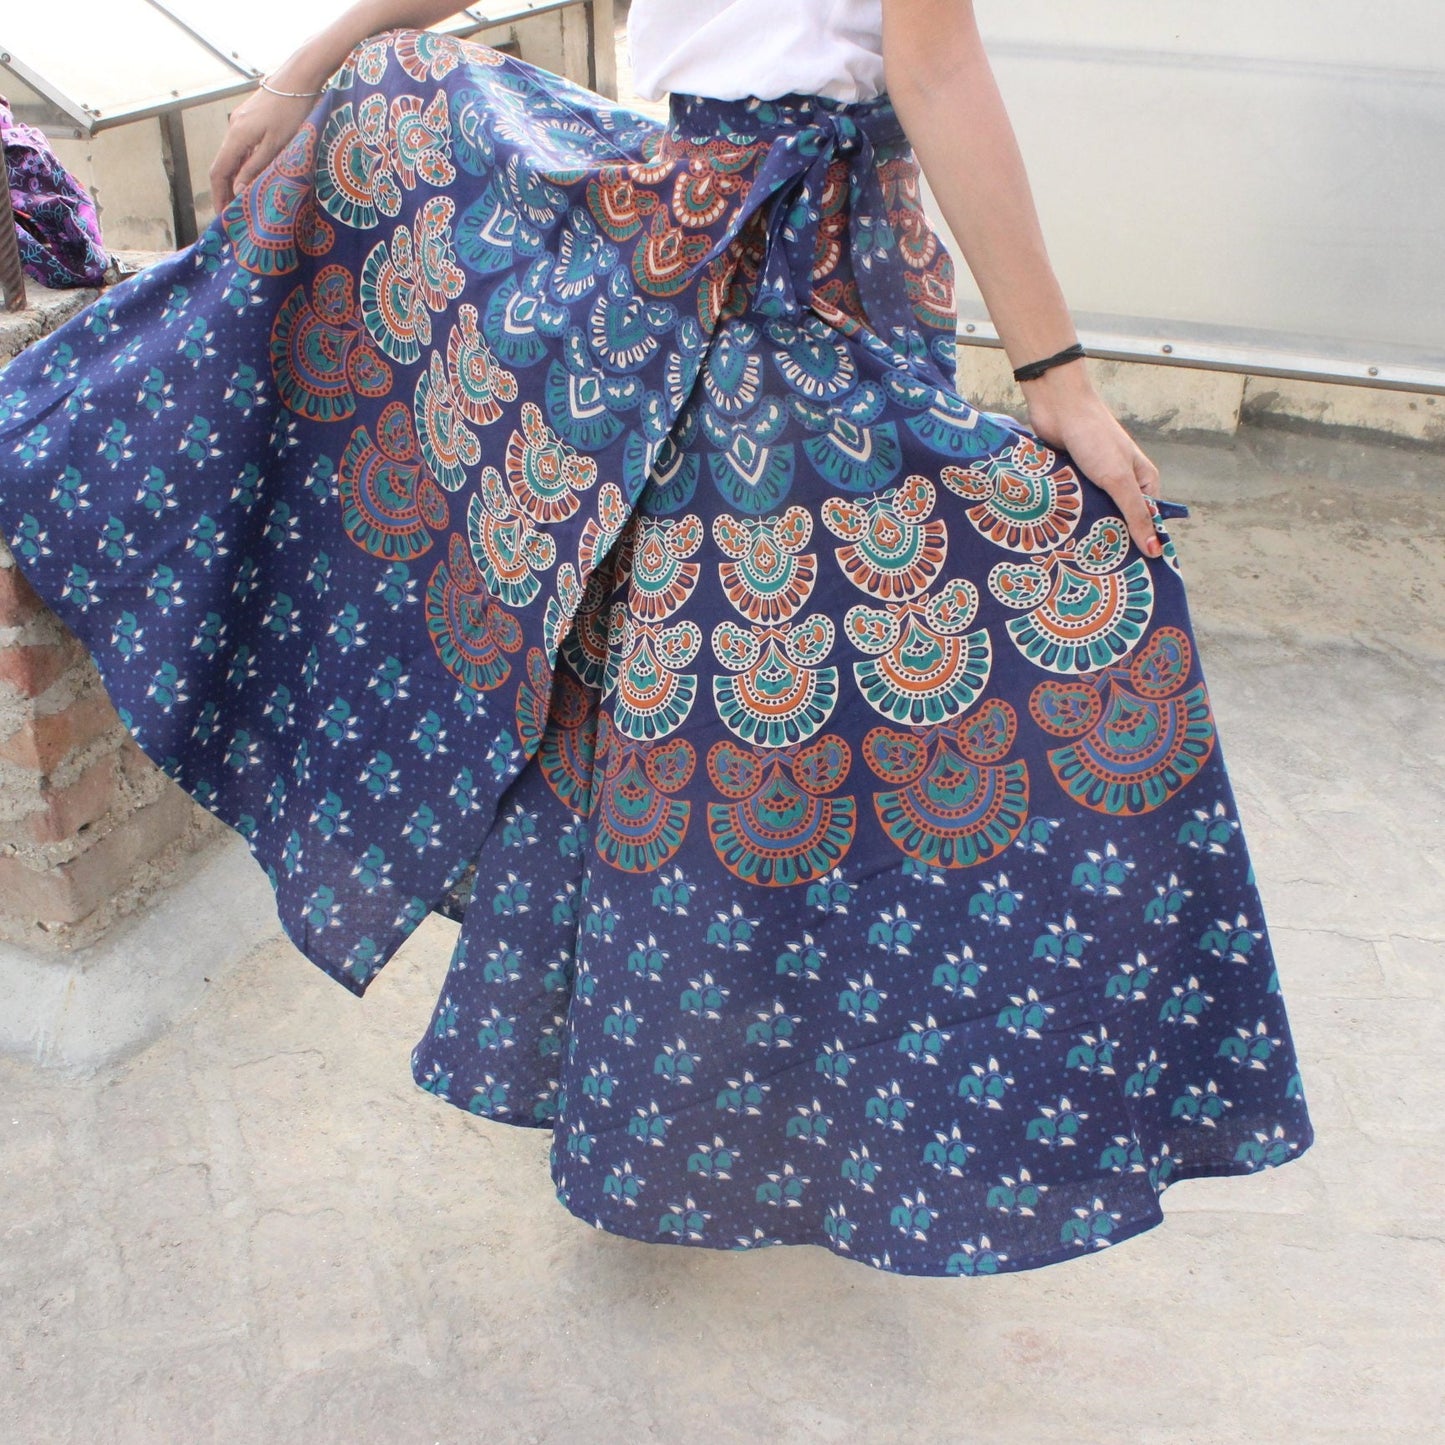 Bohemian Fairy Skirt: Embrace Your Inner Hippie with this Whimsical Festival Skirt for a Dreamy Home Outfit, Clothing skirts, gypsy skirt